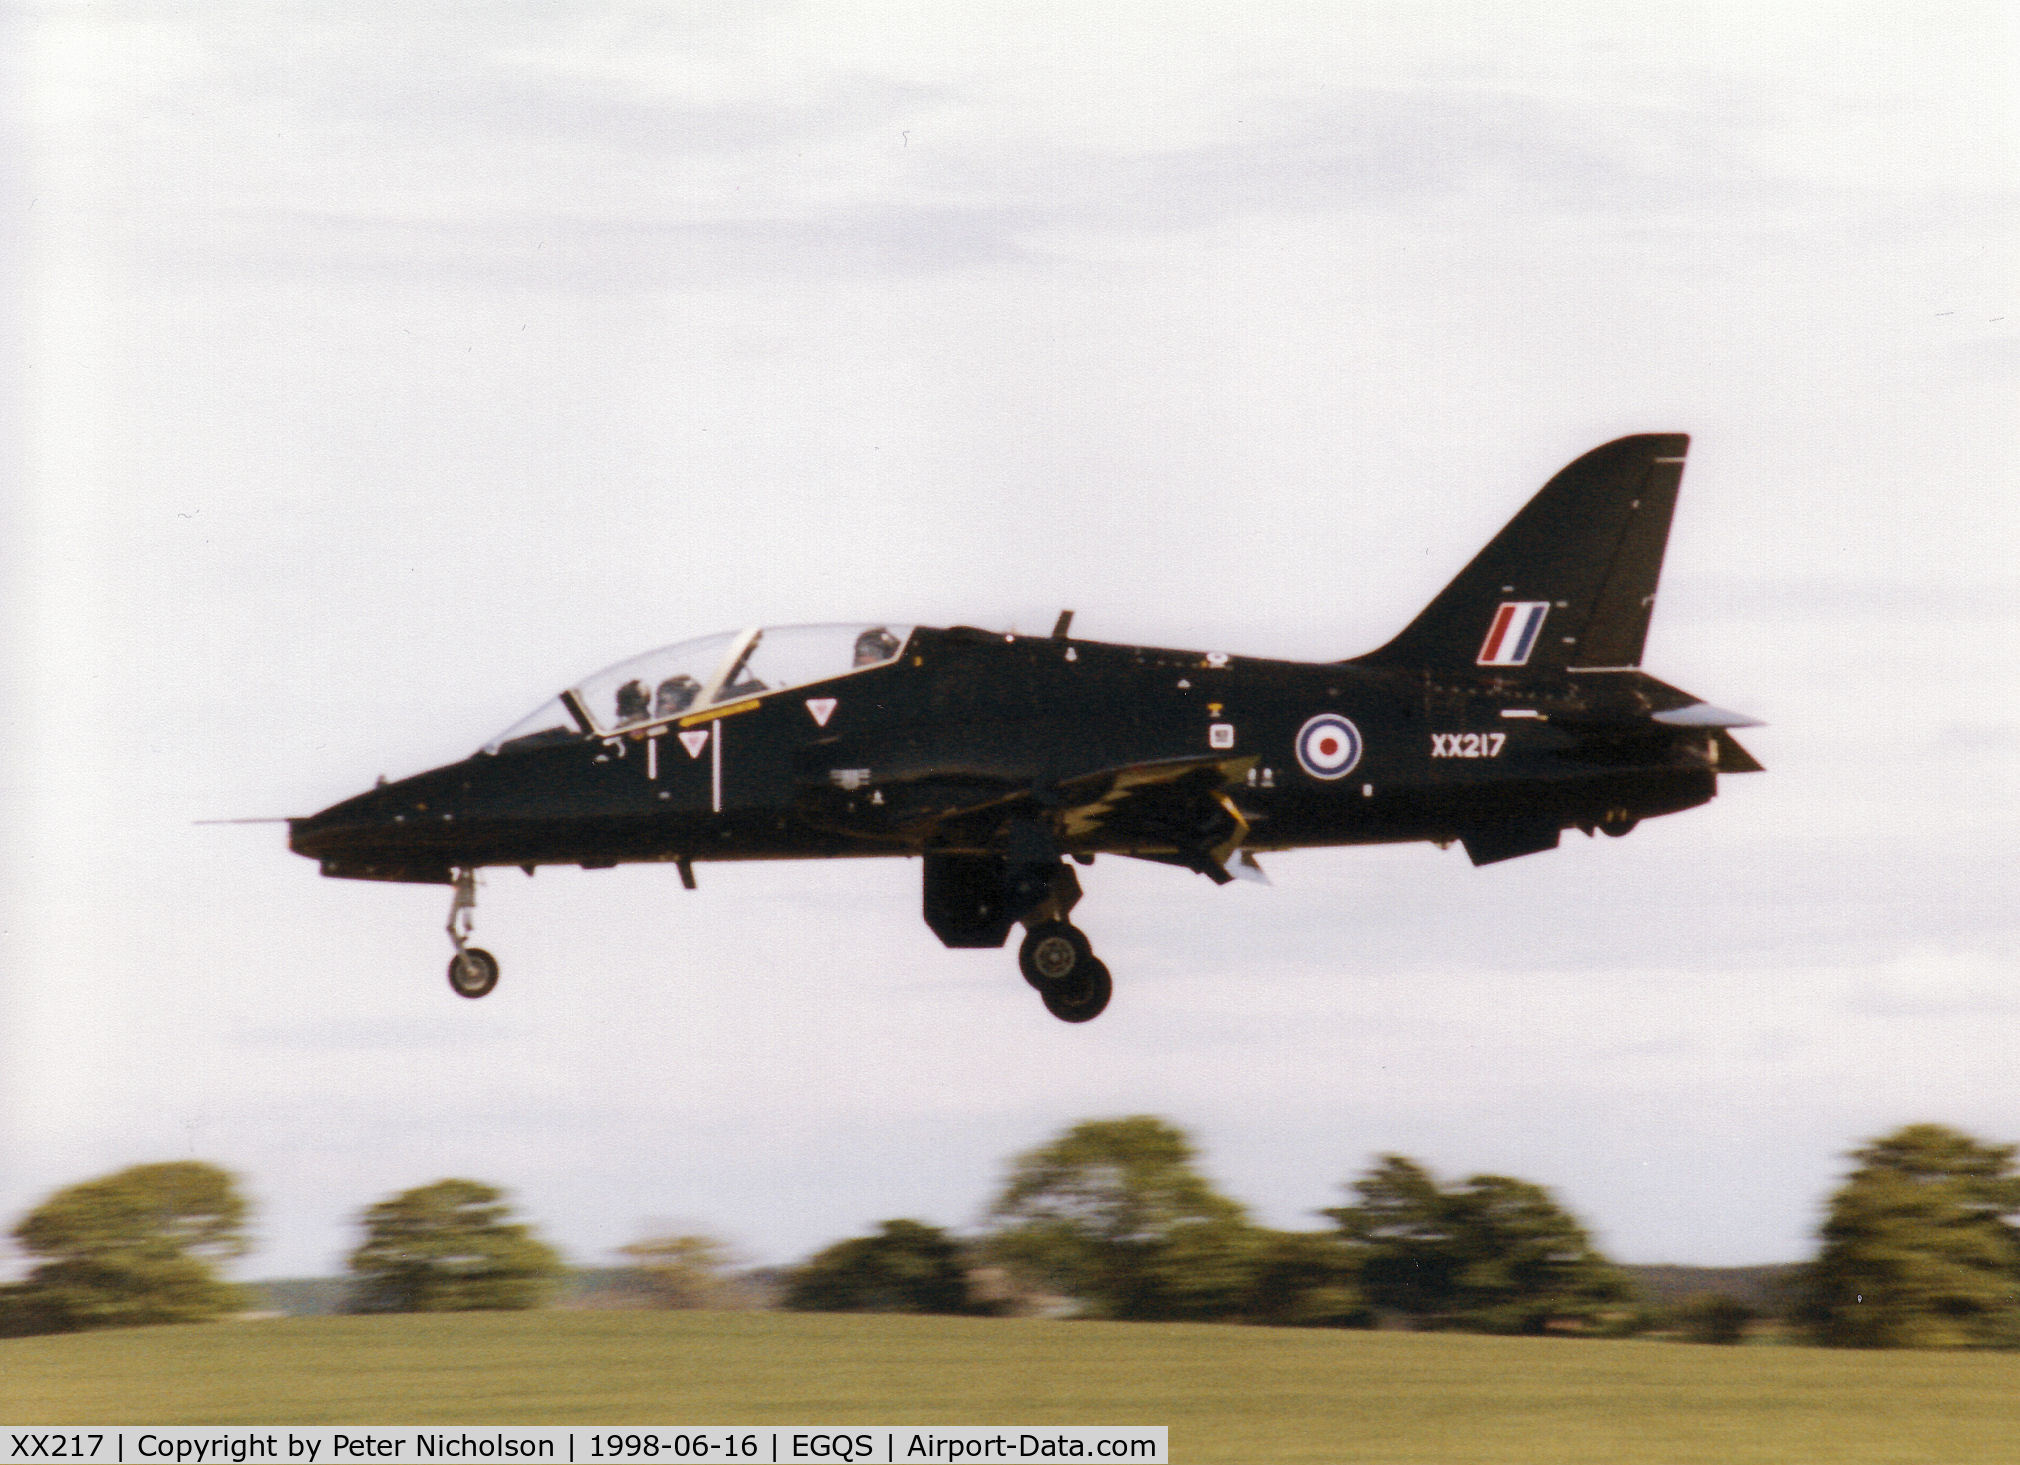 XX217, 1978 Hawker Siddeley Hawk T.1A C/N 053/312053, Hawk T.1A, callsign Culdrose Three Zero Delta, landing on Runway 05 at RAF Lossiemouth after a mission during the 1998 Joint Maritime Course.